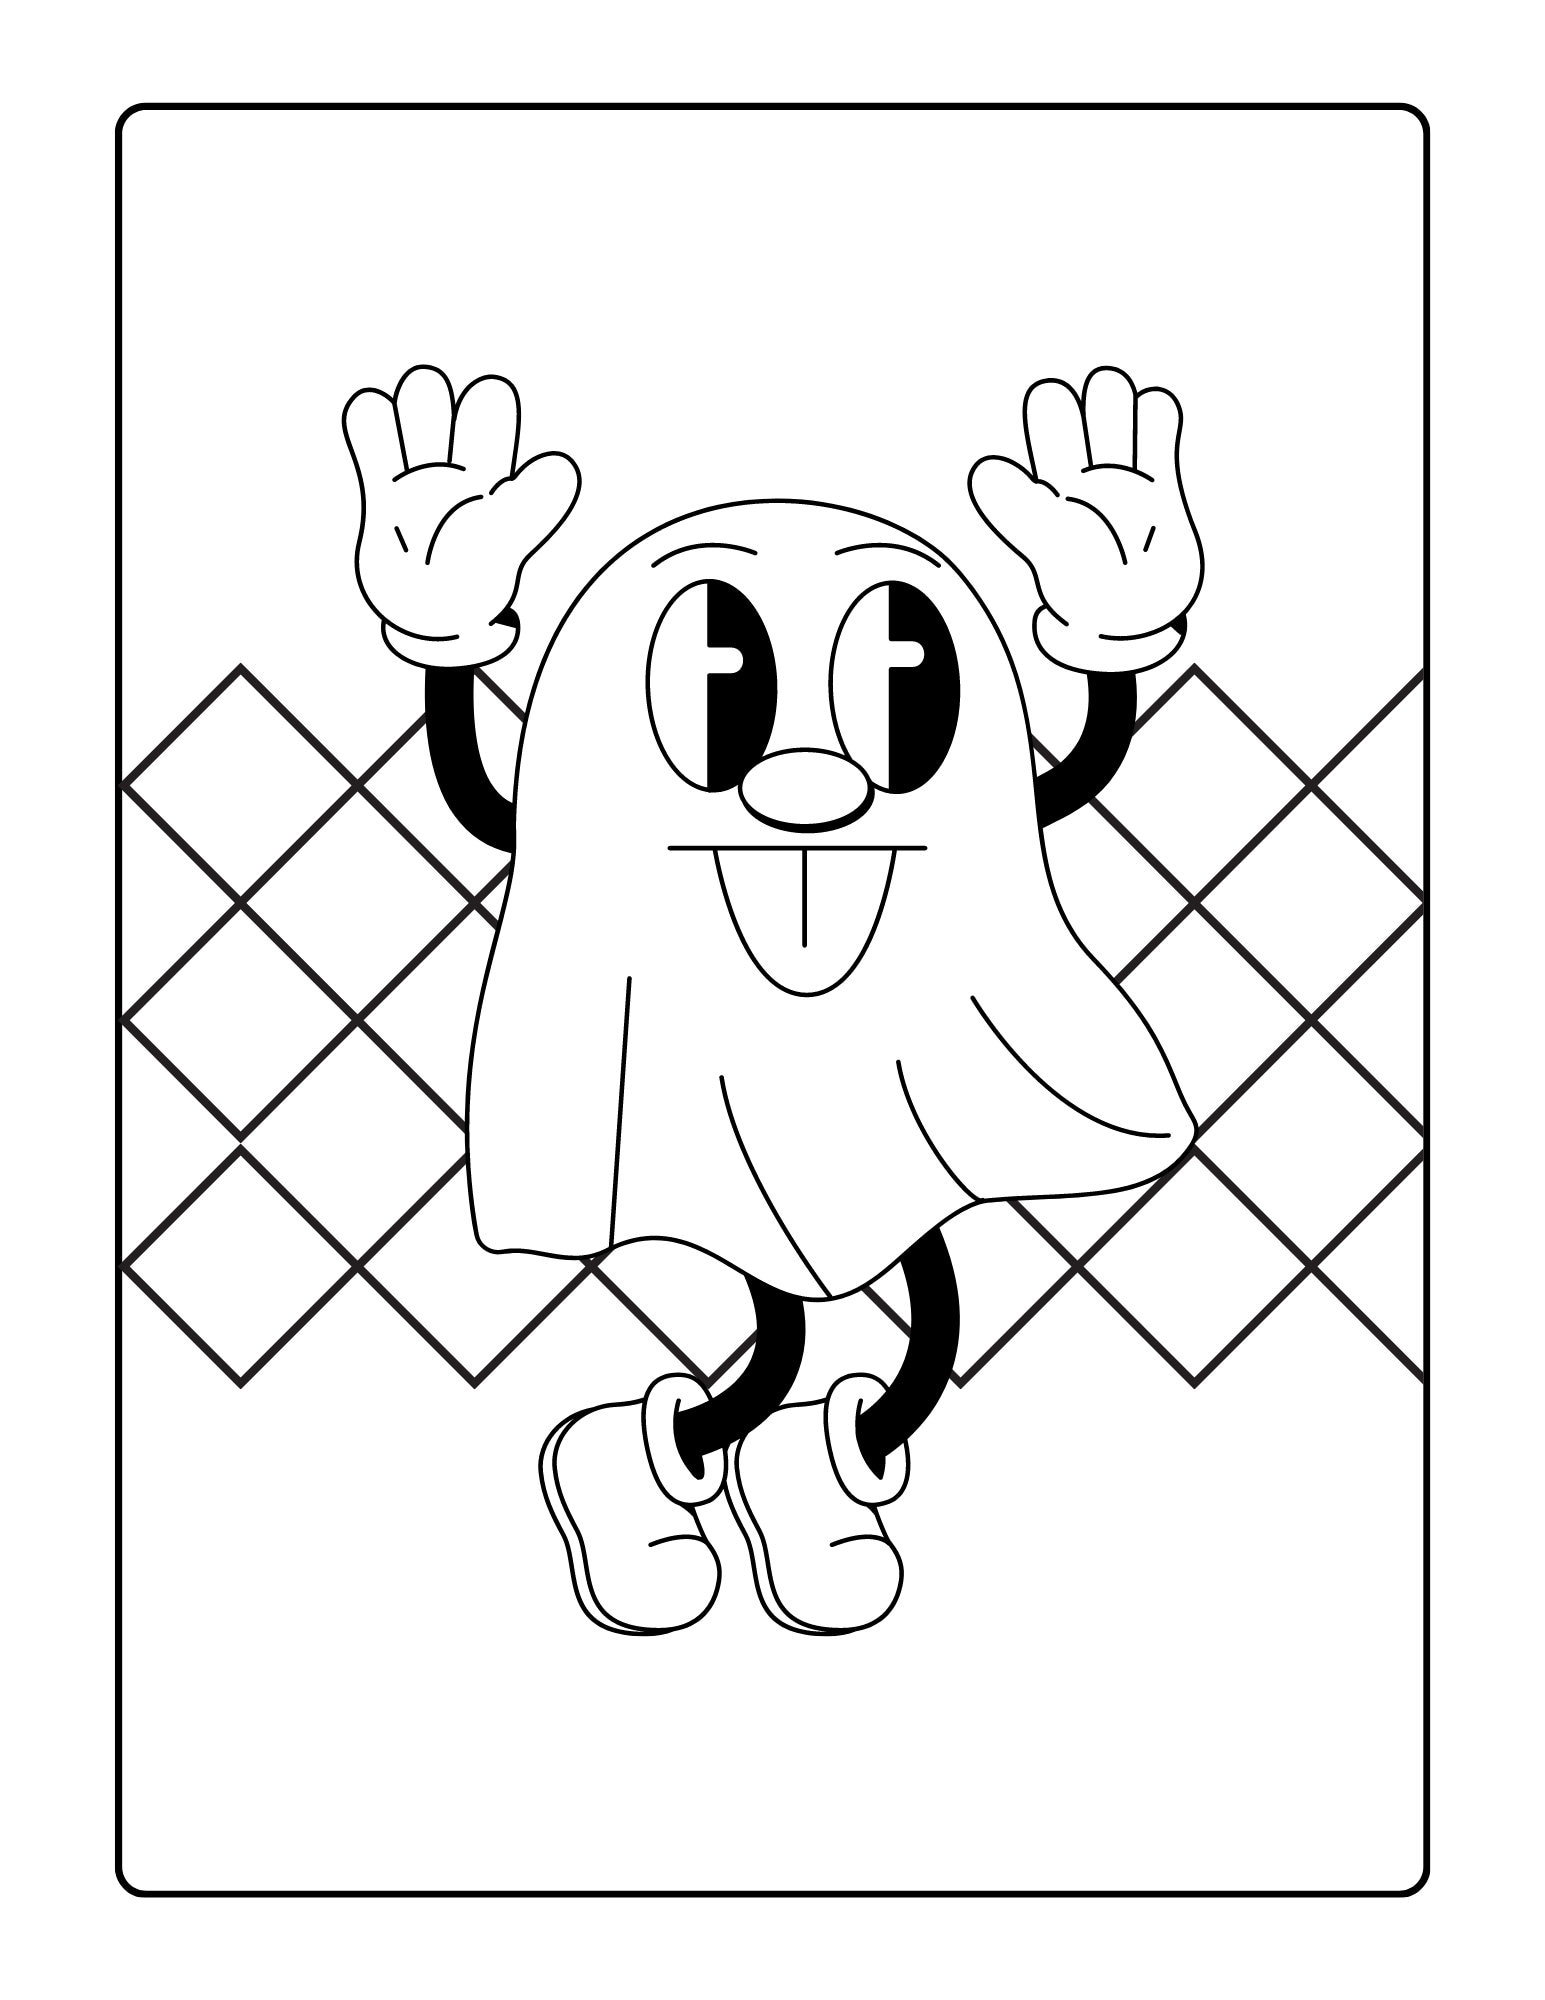 Retro cartoon coloring pages for kids adults instant download